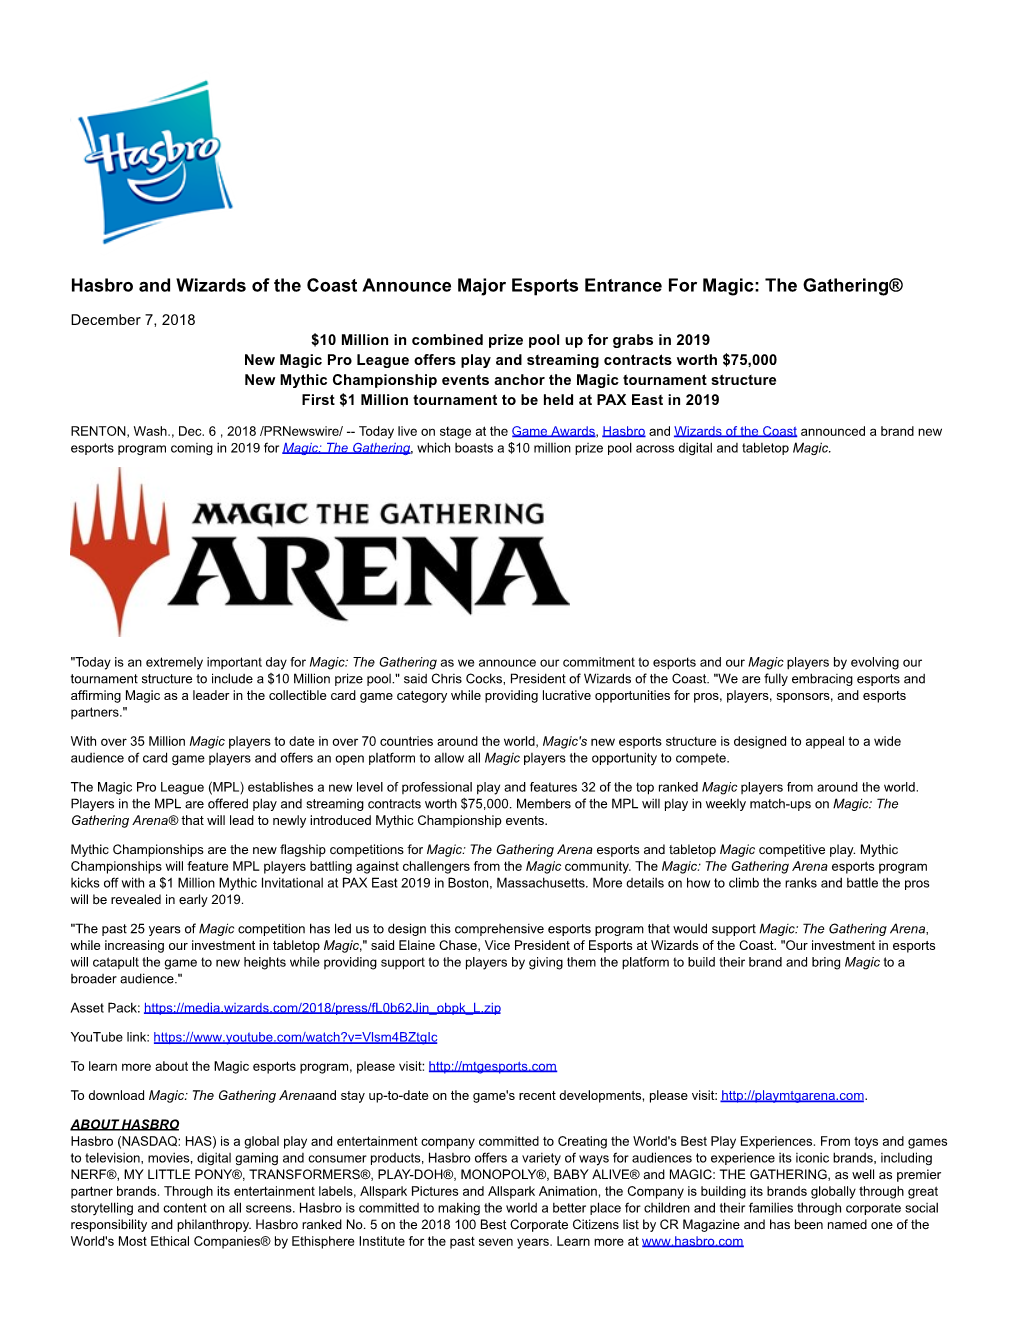 Hasbro and Wizards of the Coast Announce Major Esports Entrance for Magic: the Gathering®